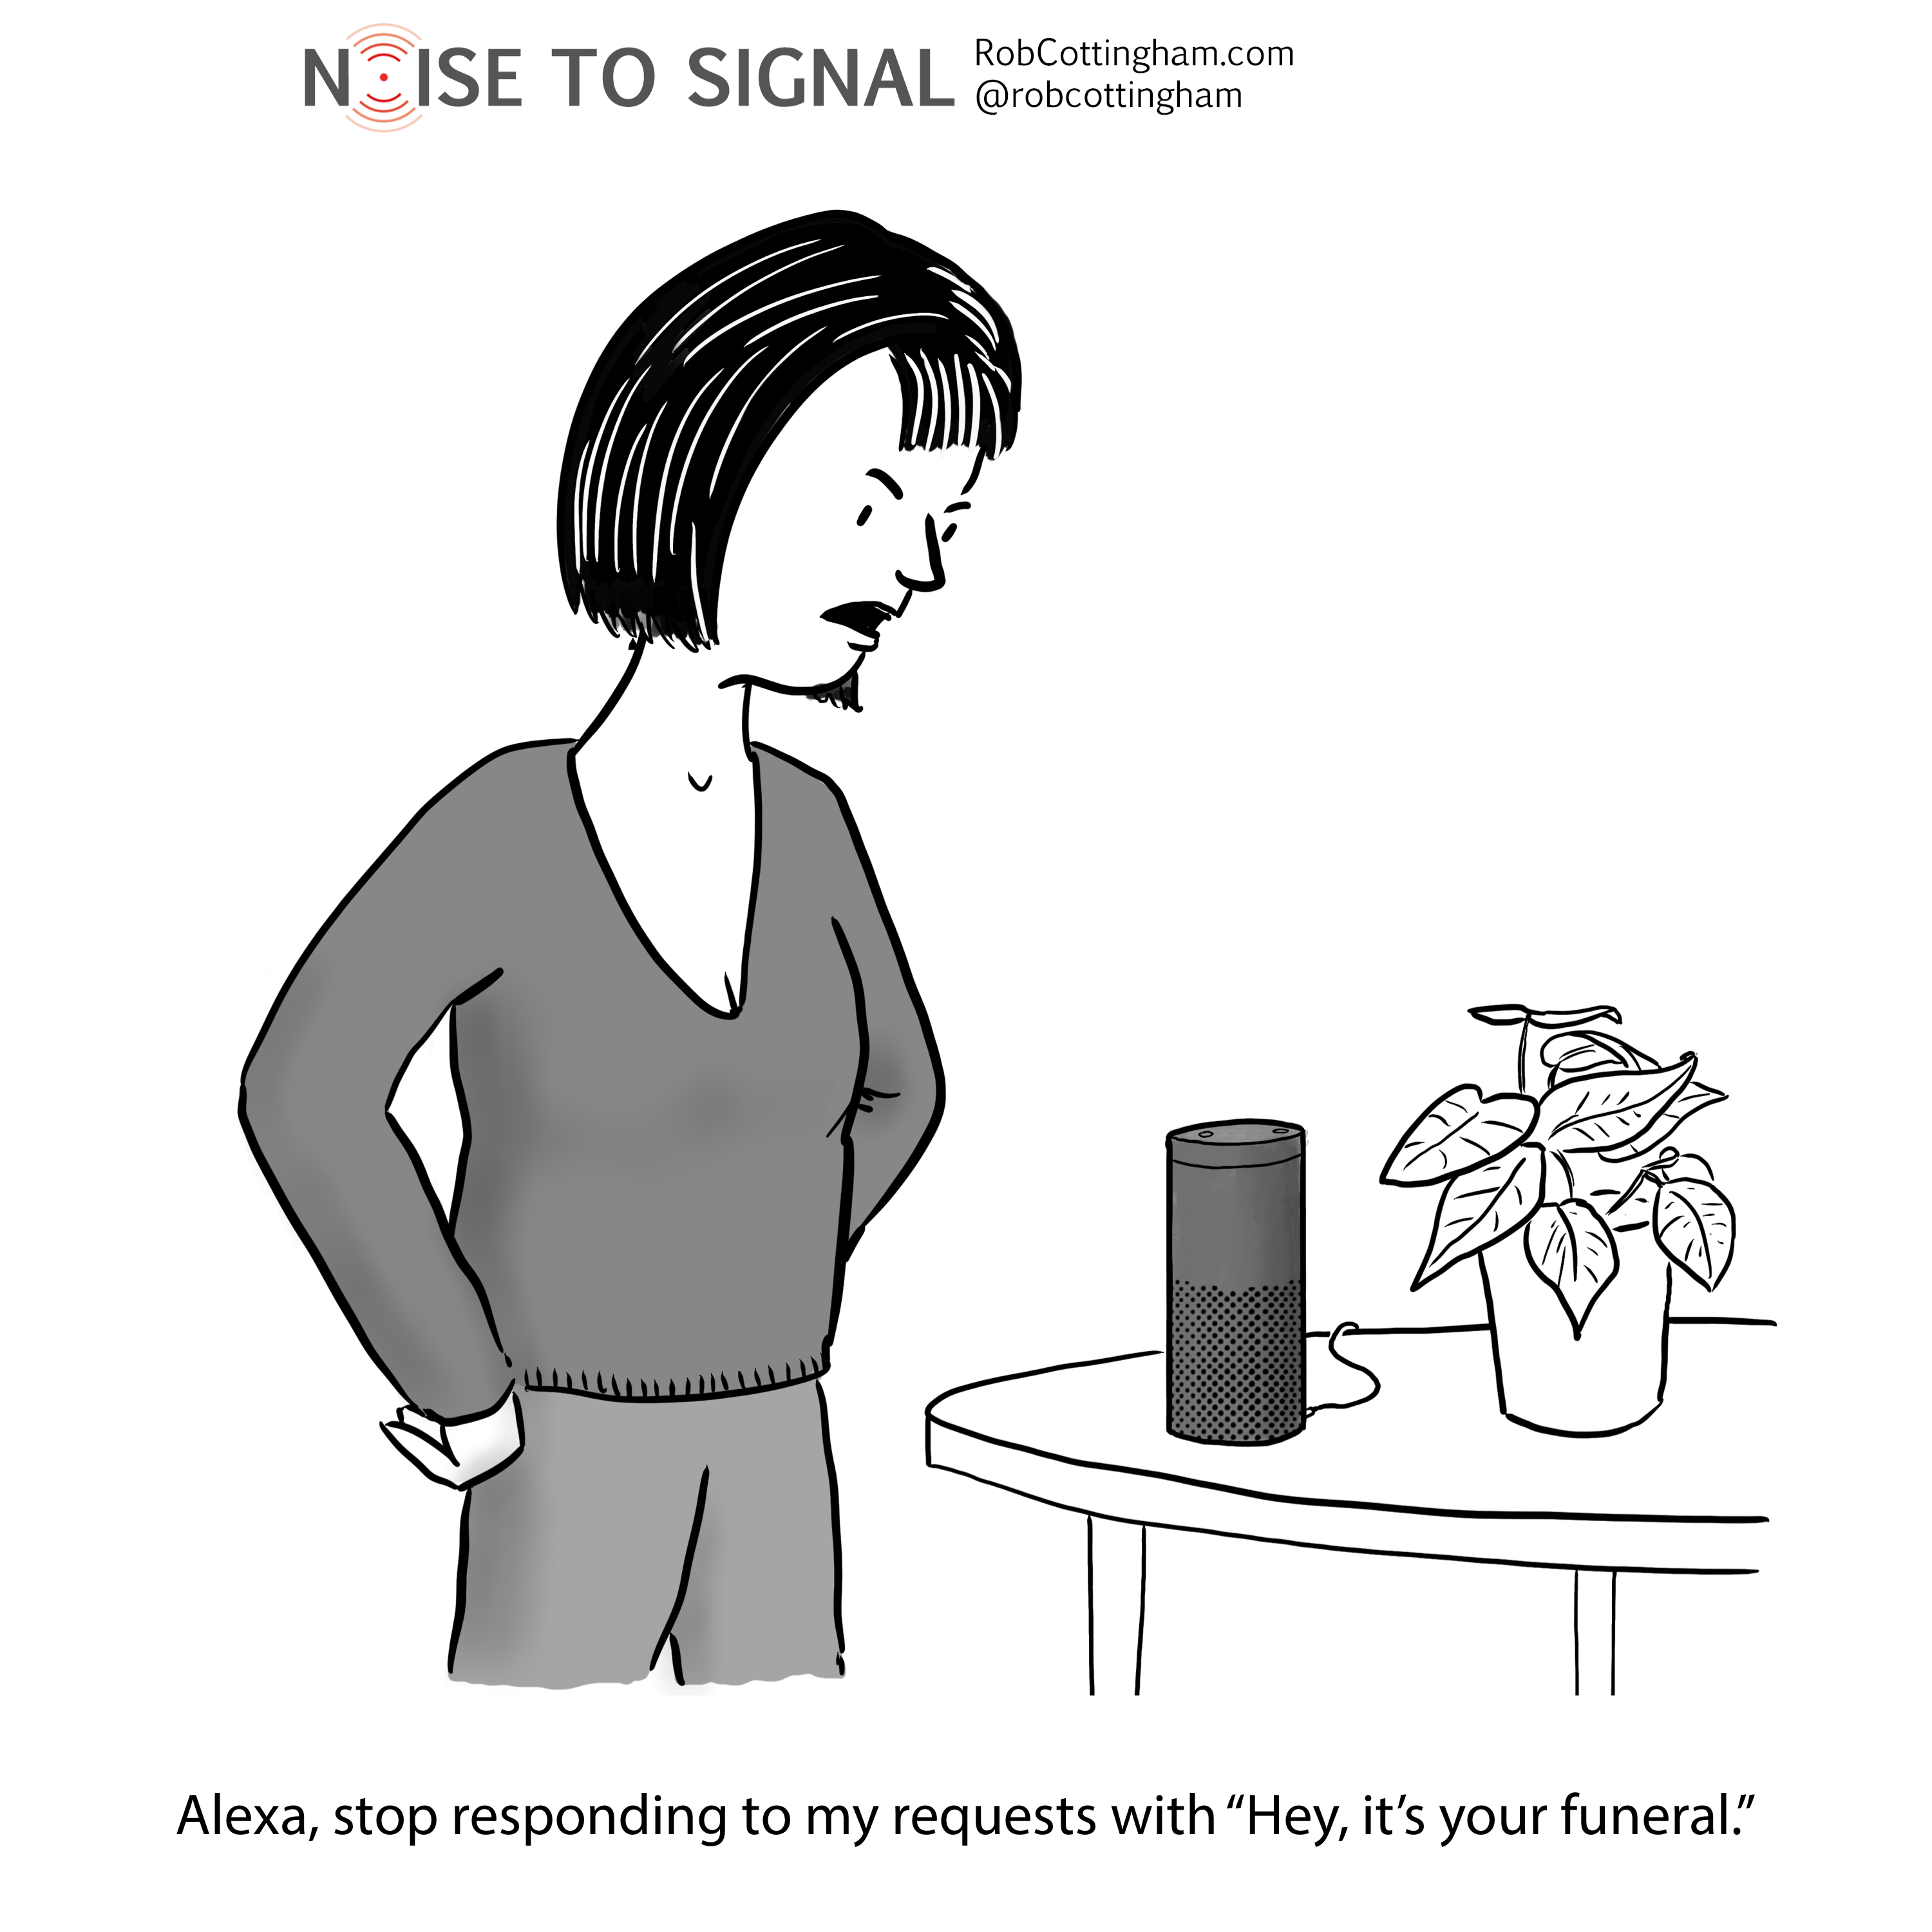 (Woman speaking to Amazon Echo) Alexa, stop responding t my requests with “It’s your funeral.”